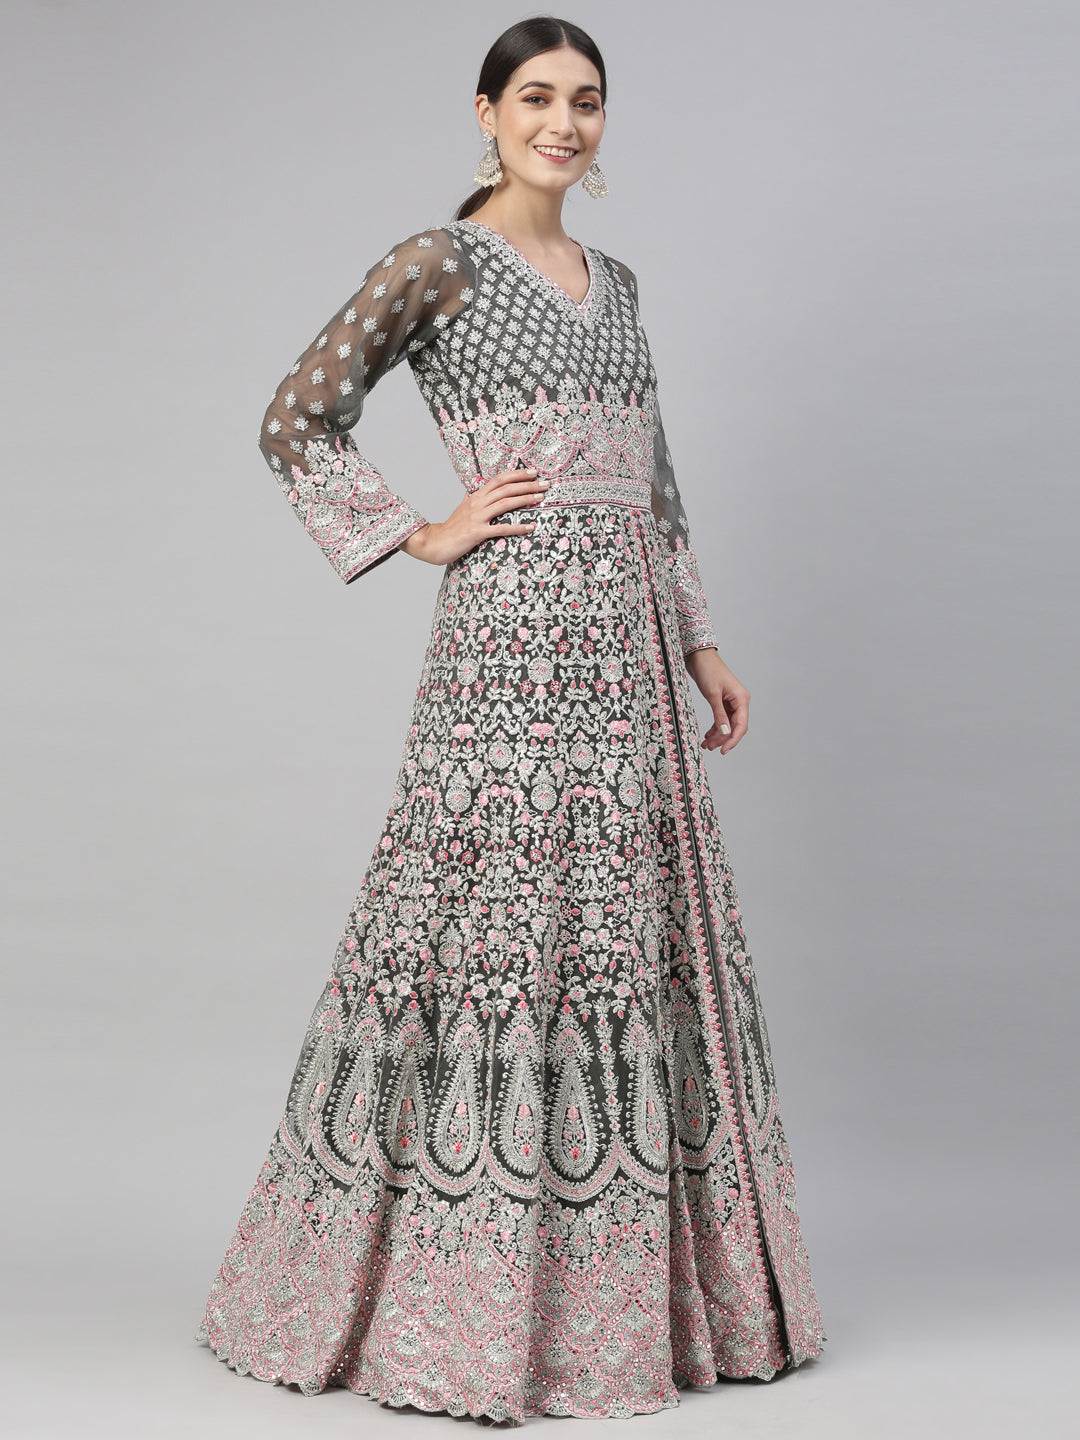 Opting for a beautiful pink embroidered silk lehenga from the Neerus  collection by Avnish, Karisma Kapoor looks… | Indian fashion, Sangeet outfit,  Red wedding gowns